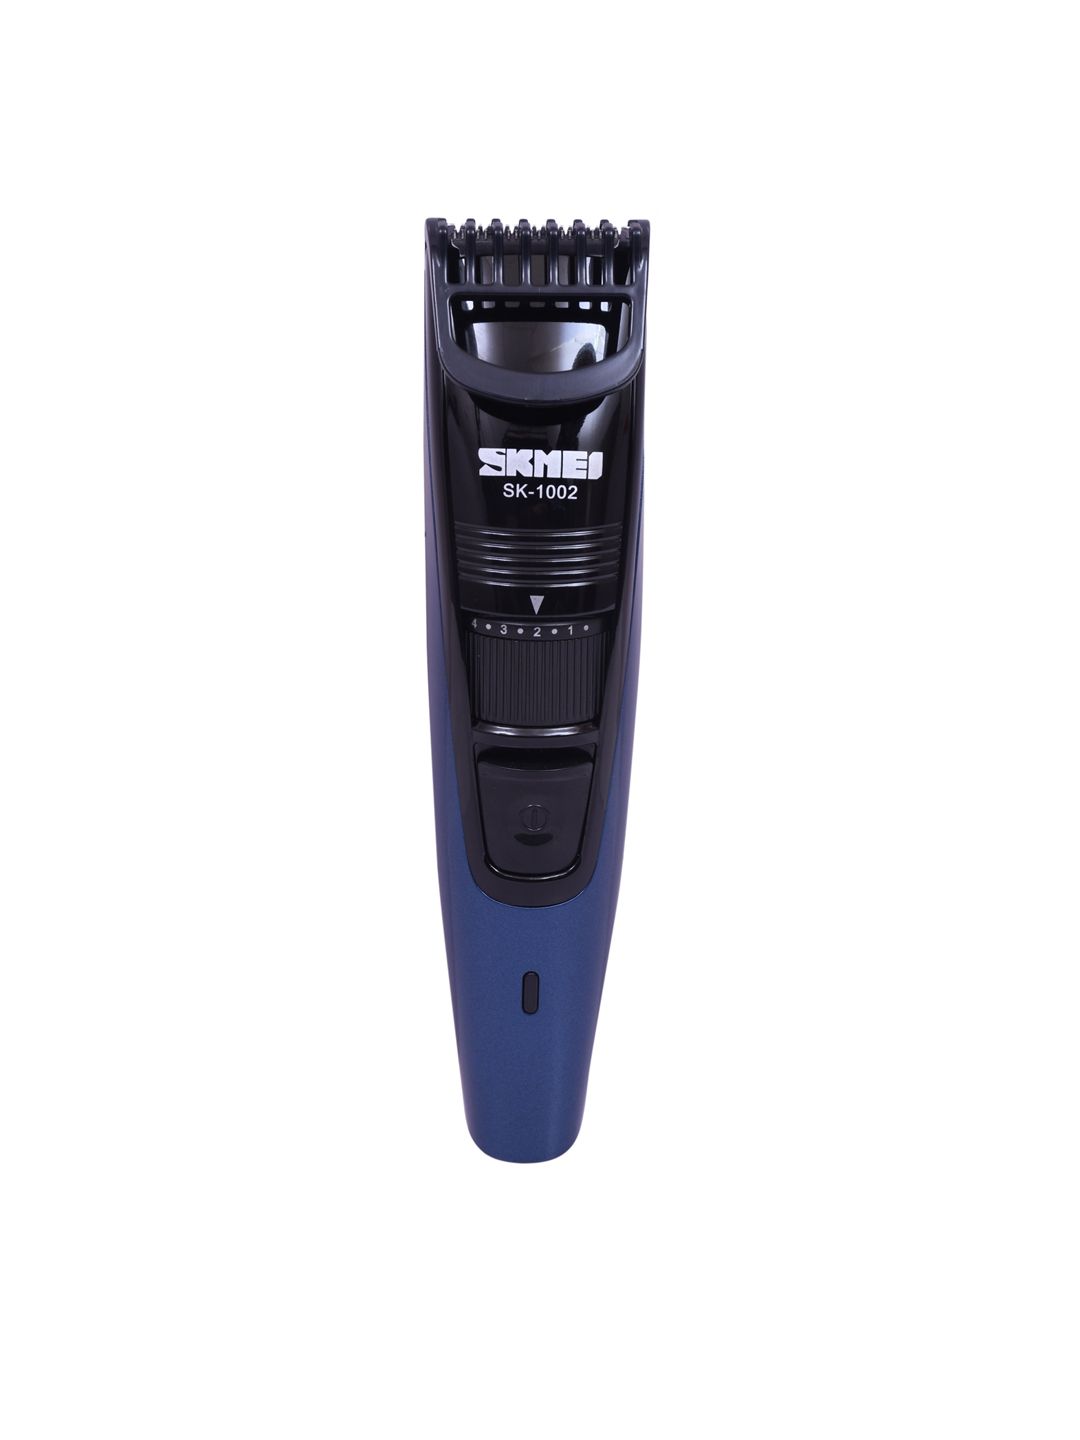 Skmei Black & Blue 1002 Rechargeble Hair Trimmer Price in India